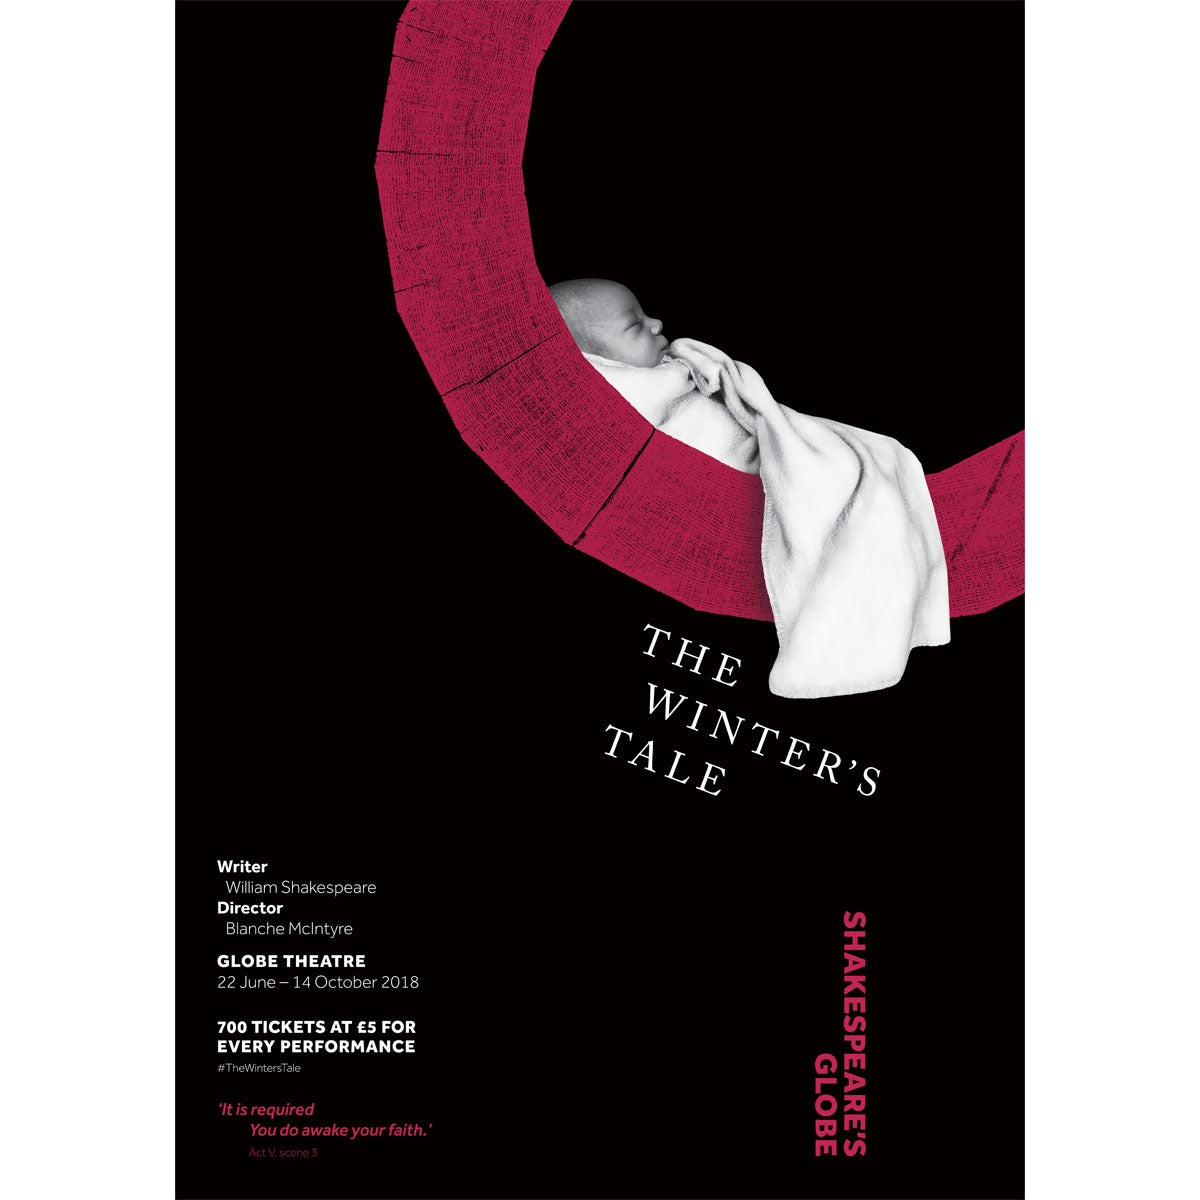 Poster celebrating the 2018 production of The Winter's Tale in the Globe Theatre at Shakespeare's Globe.  Against a black background, a baby wrapped in a white blanket sleeps, cradled by part of the Shakespeare's Globe logo in red. The name of the play is beneath.